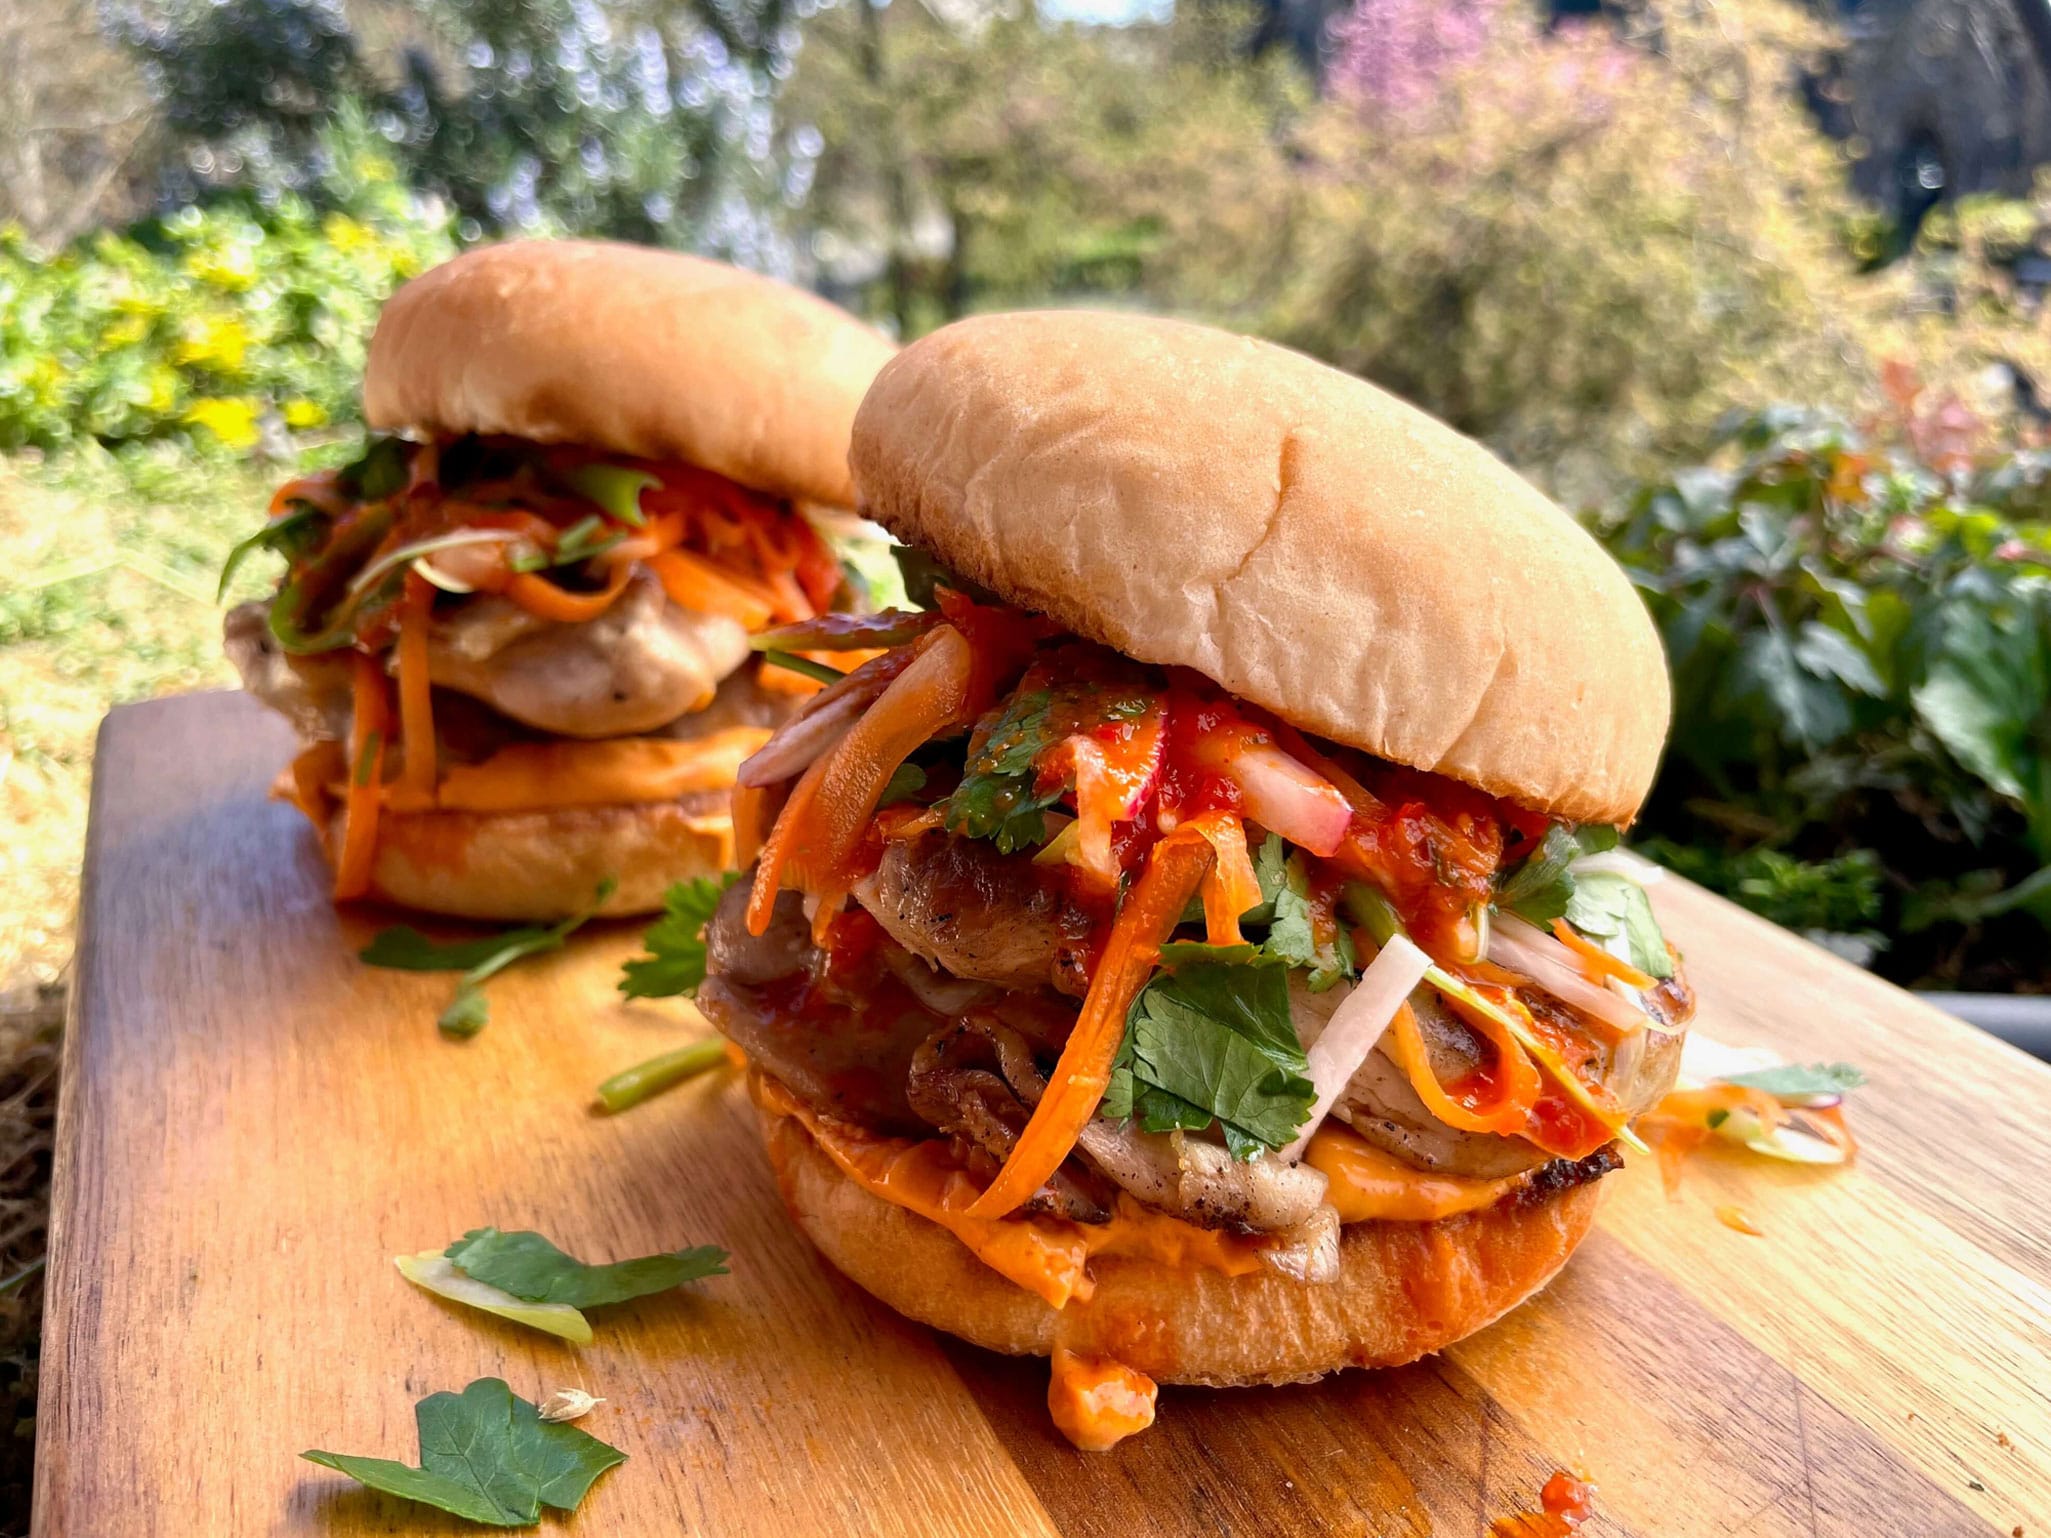 Grilled Chicken Burger with Spicy Slaw and Gochujang Mayo